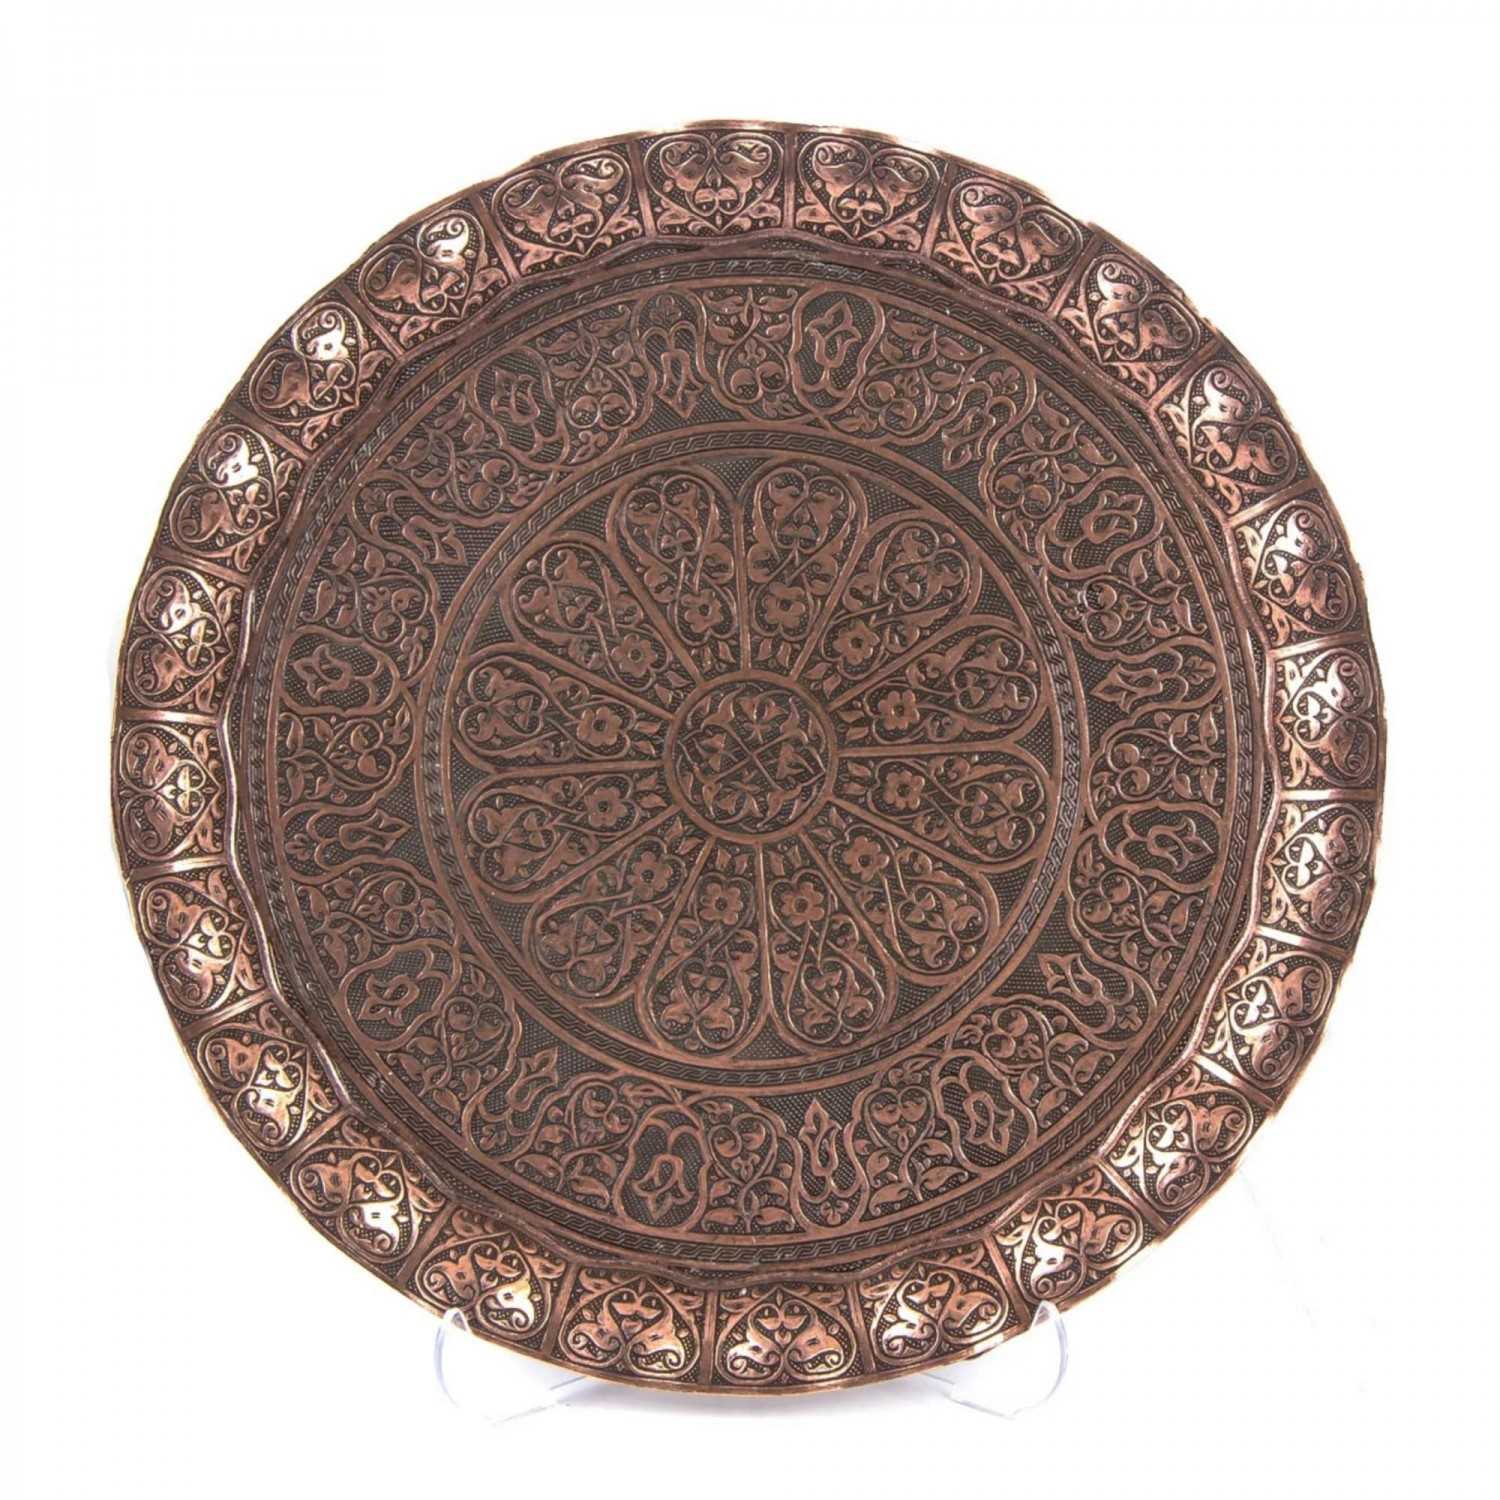 Middle Eastern Style Decorative Round Serving Tray